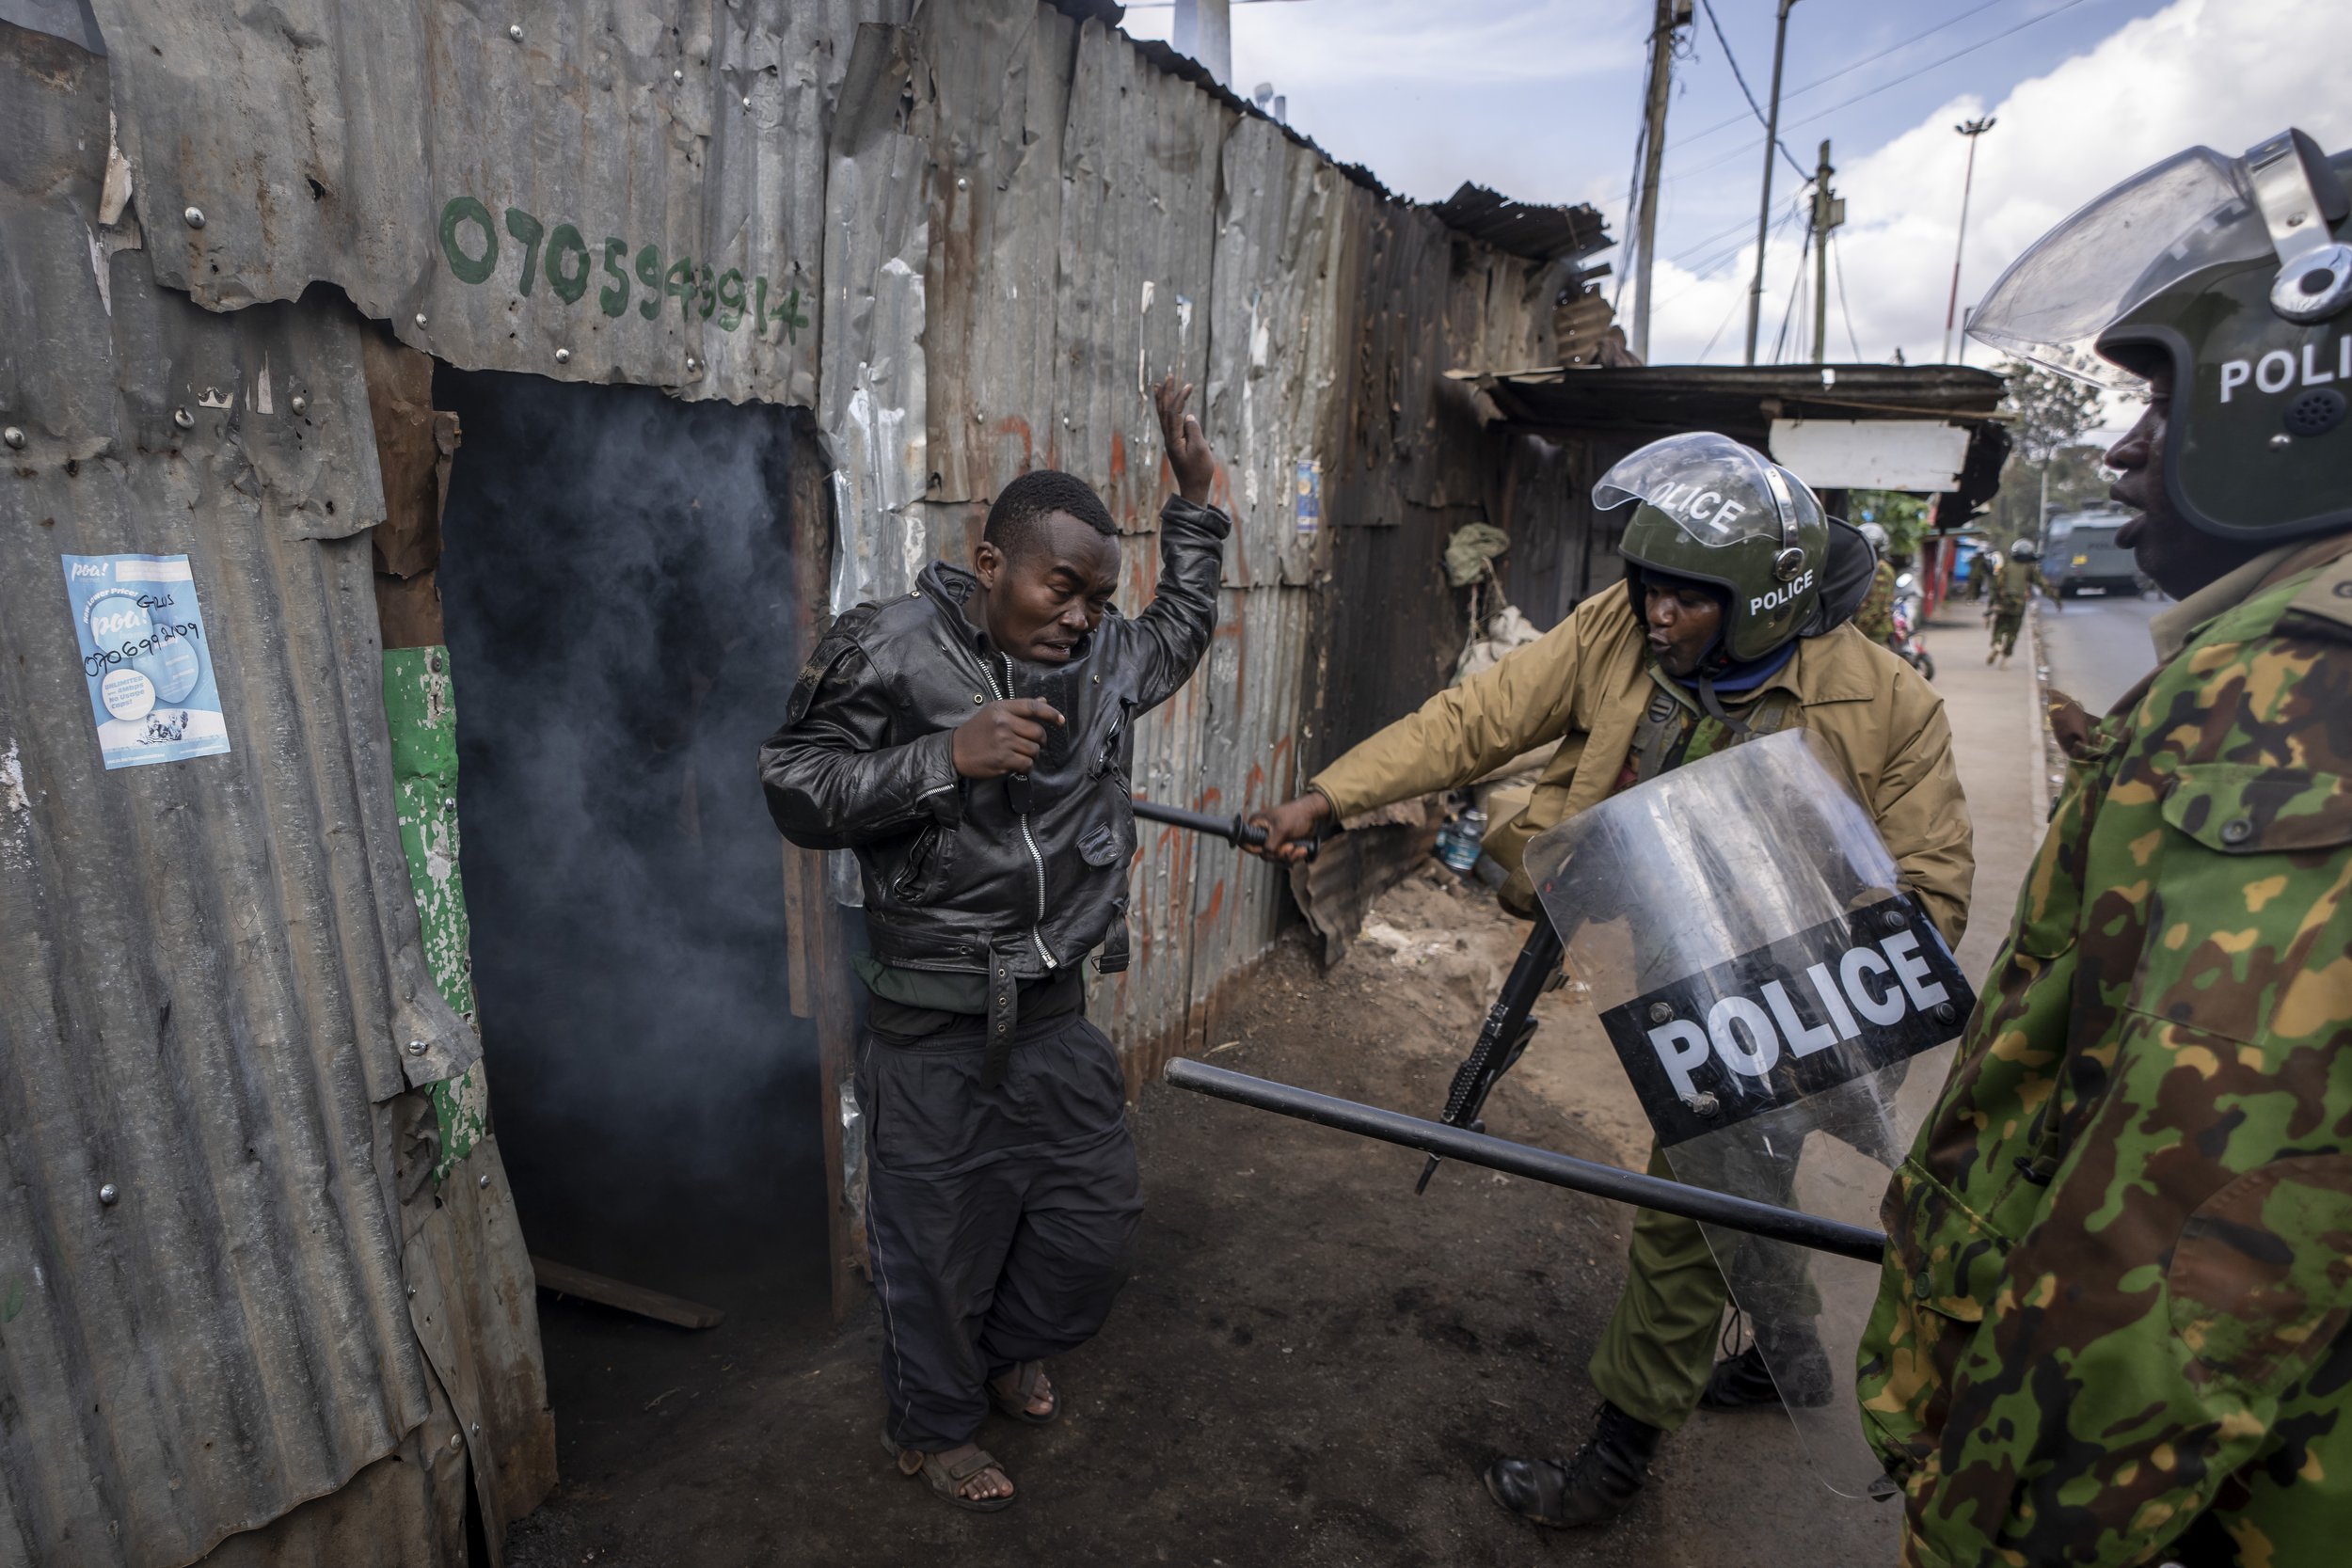  Police beat a protester who had hidden in a shack, after they threw a tear gas grenade inside to force him out, in the Kibera slum of Nairobi, Kenya on March 20, 2023. Hundreds of opposition supporters had taken to the streets of the Kenyan capital 